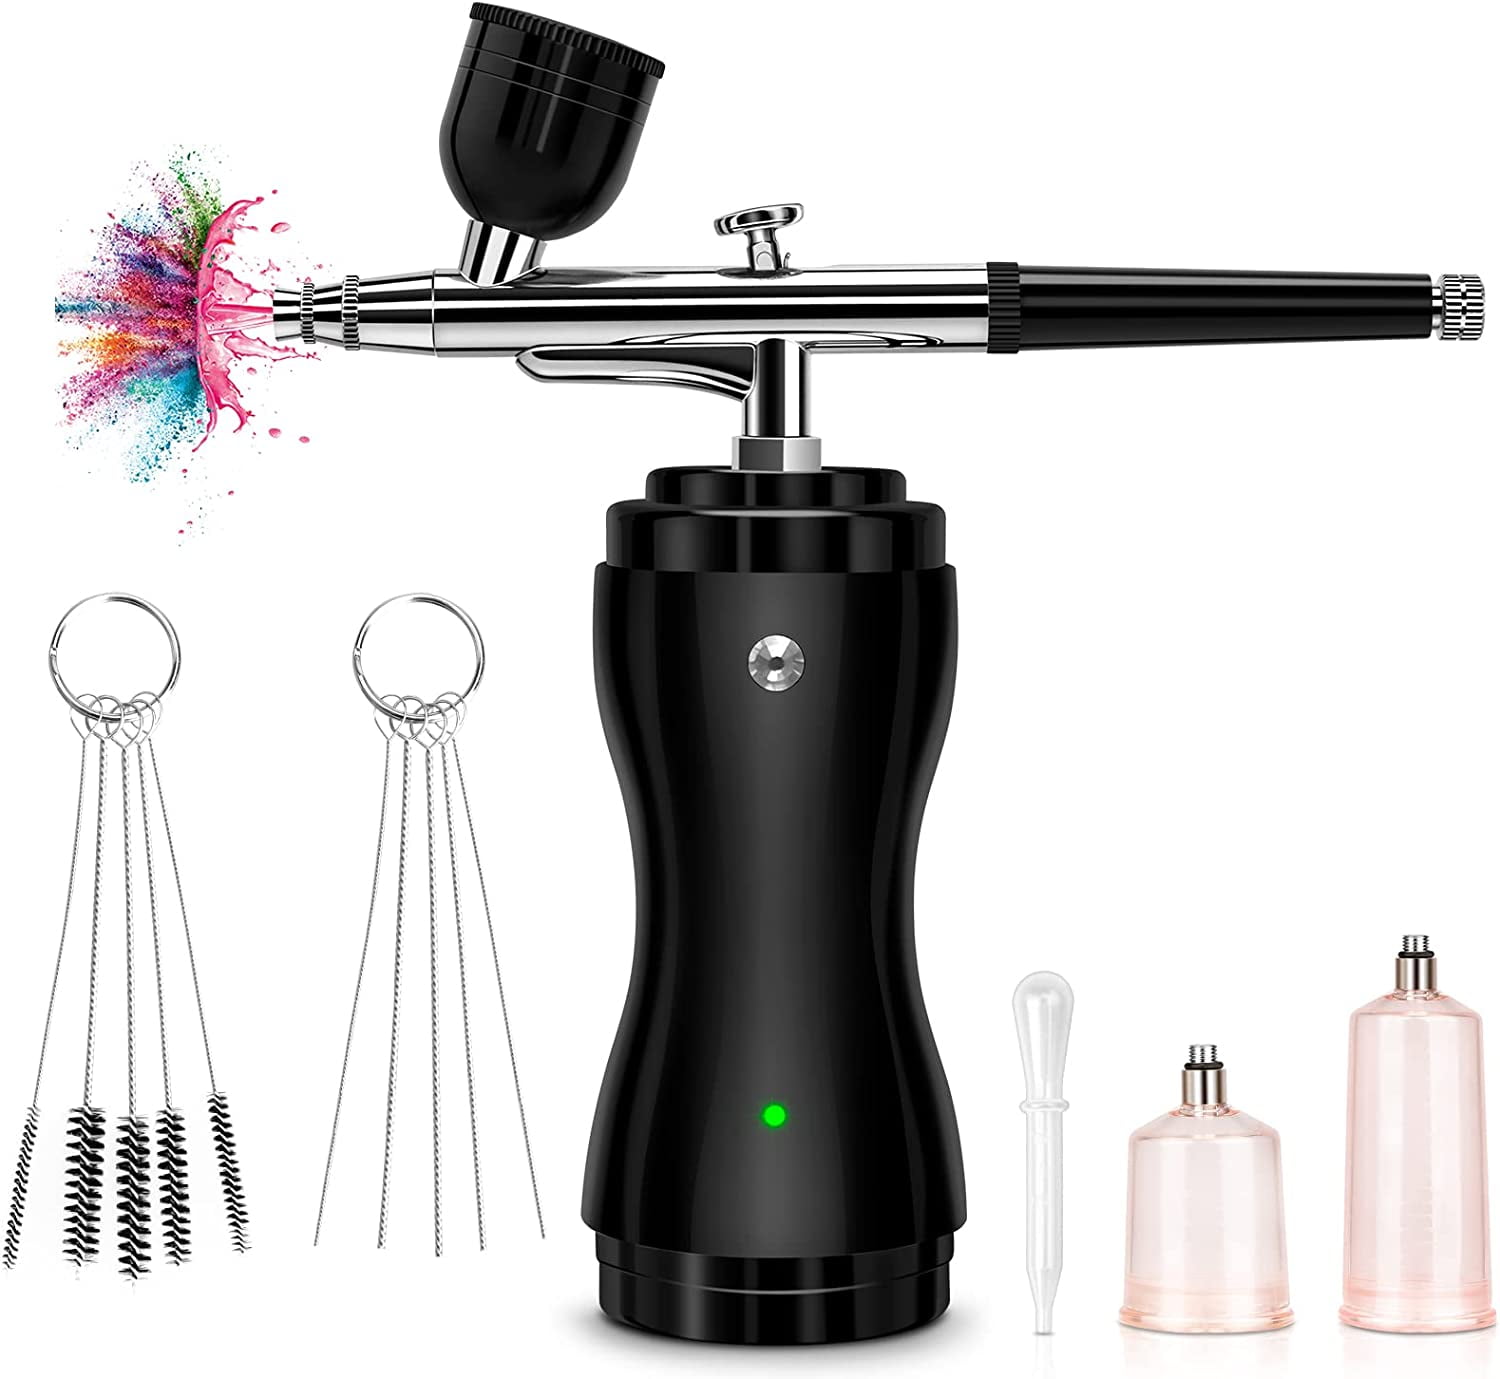 OPHIR 0.3mm Nail Art Airbrush Kit with Air Compressor 12 Color Inks 20  Airbrushing Stencils & Bag & Cleaning Brush Nail Tool Set